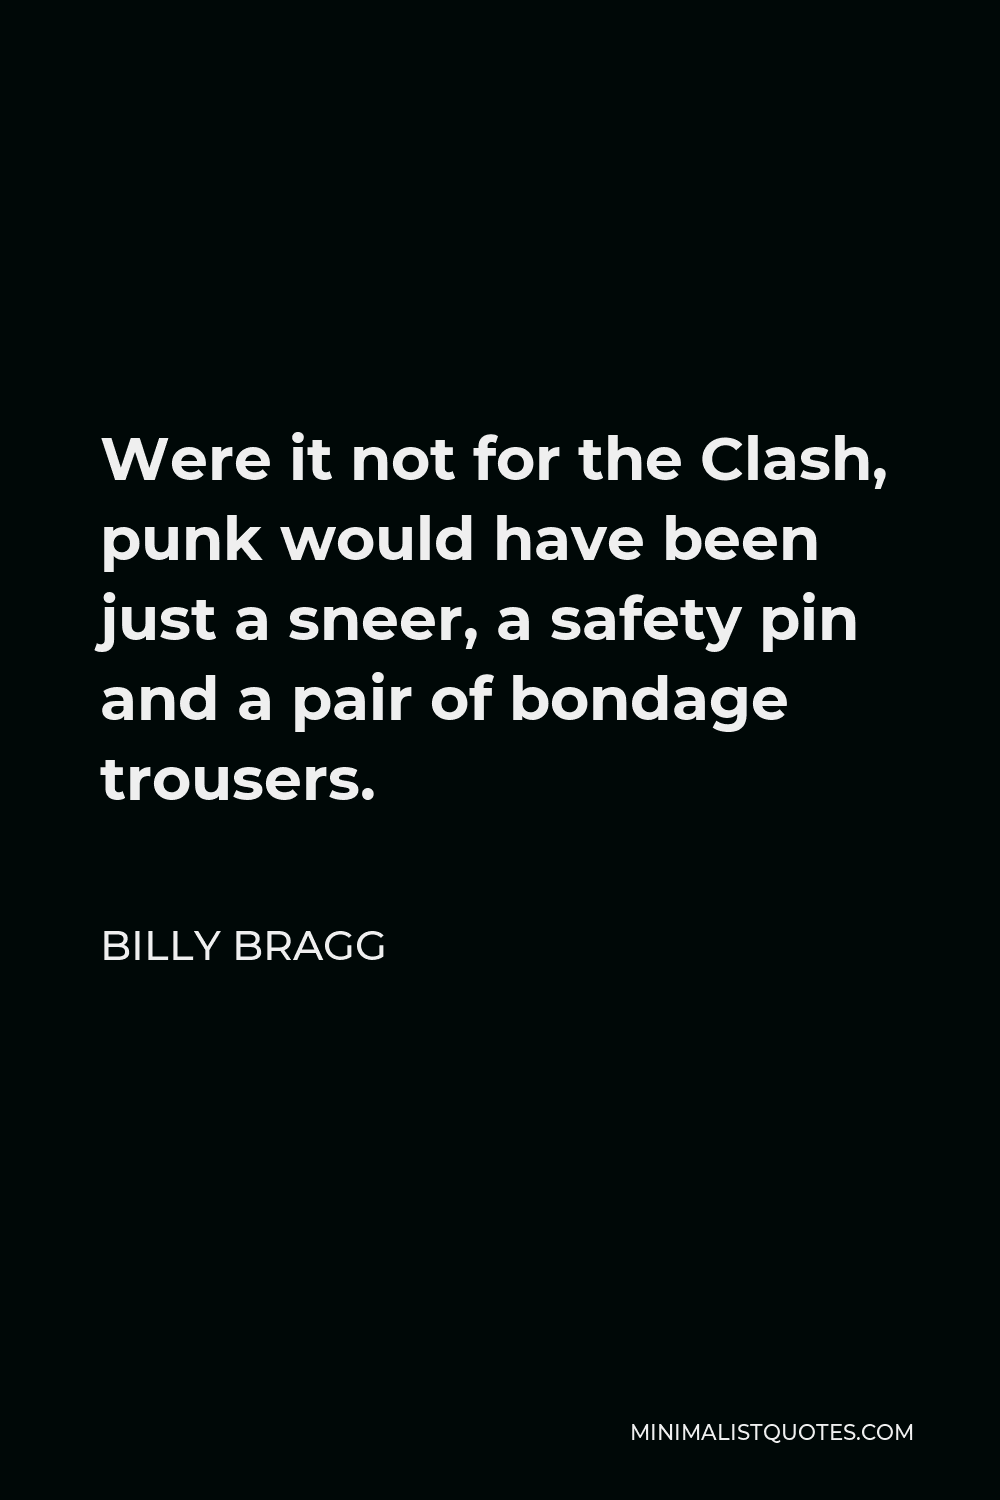 Billy Bragg Quote - Were it not for the Clash, punk would have been just a sneer, a safety pin and a pair of bondage trousers.